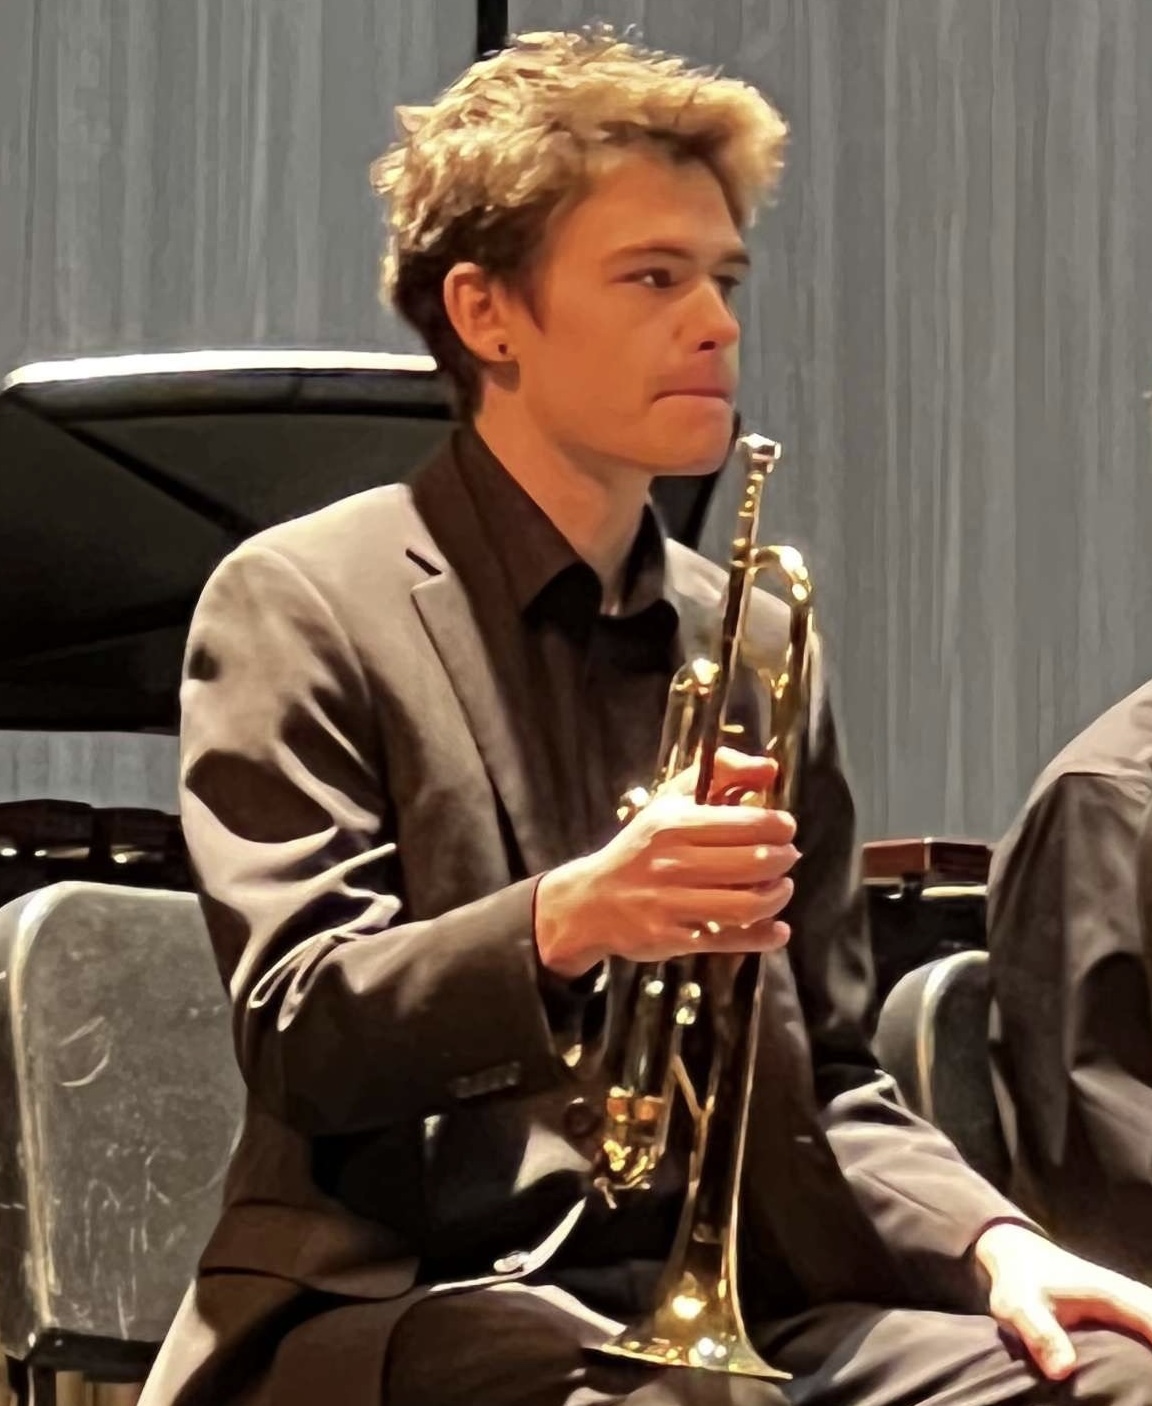 10 Questions with Woodhaven High School musician Thomas Crispell